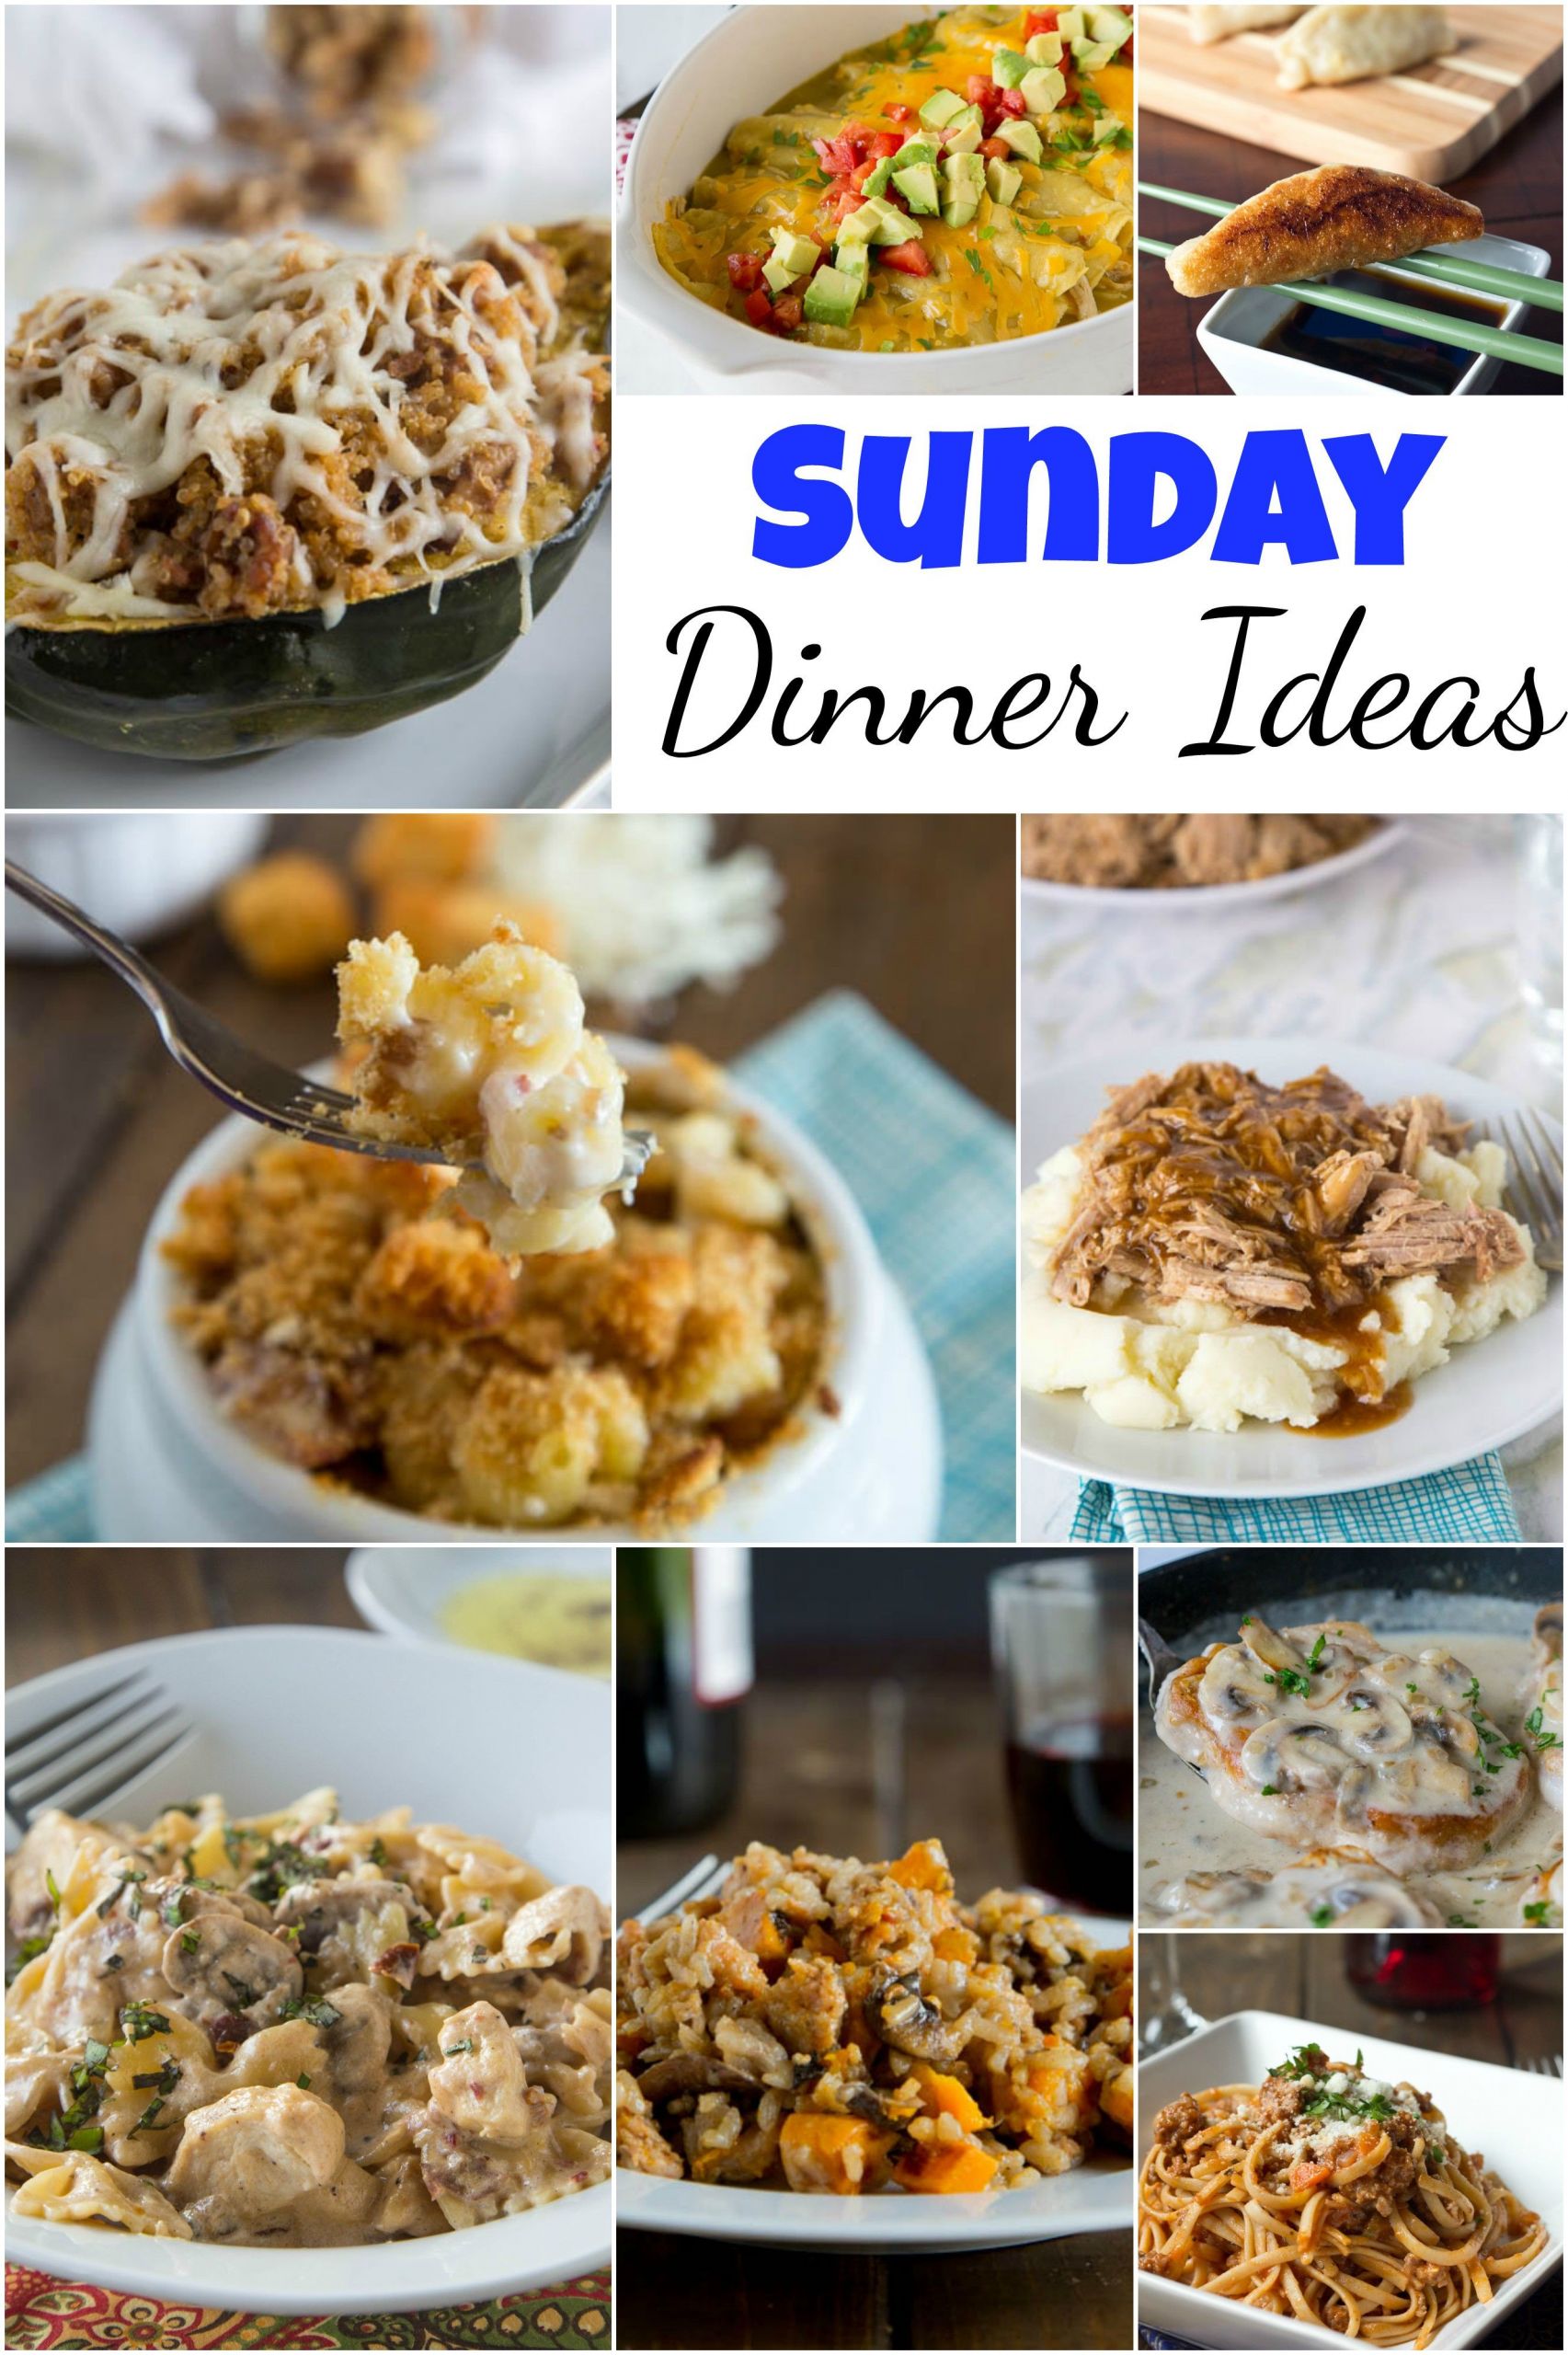 Sunday Family Dinner Ideas
 Sunday Dinner Ideas the weekend is for special dinners